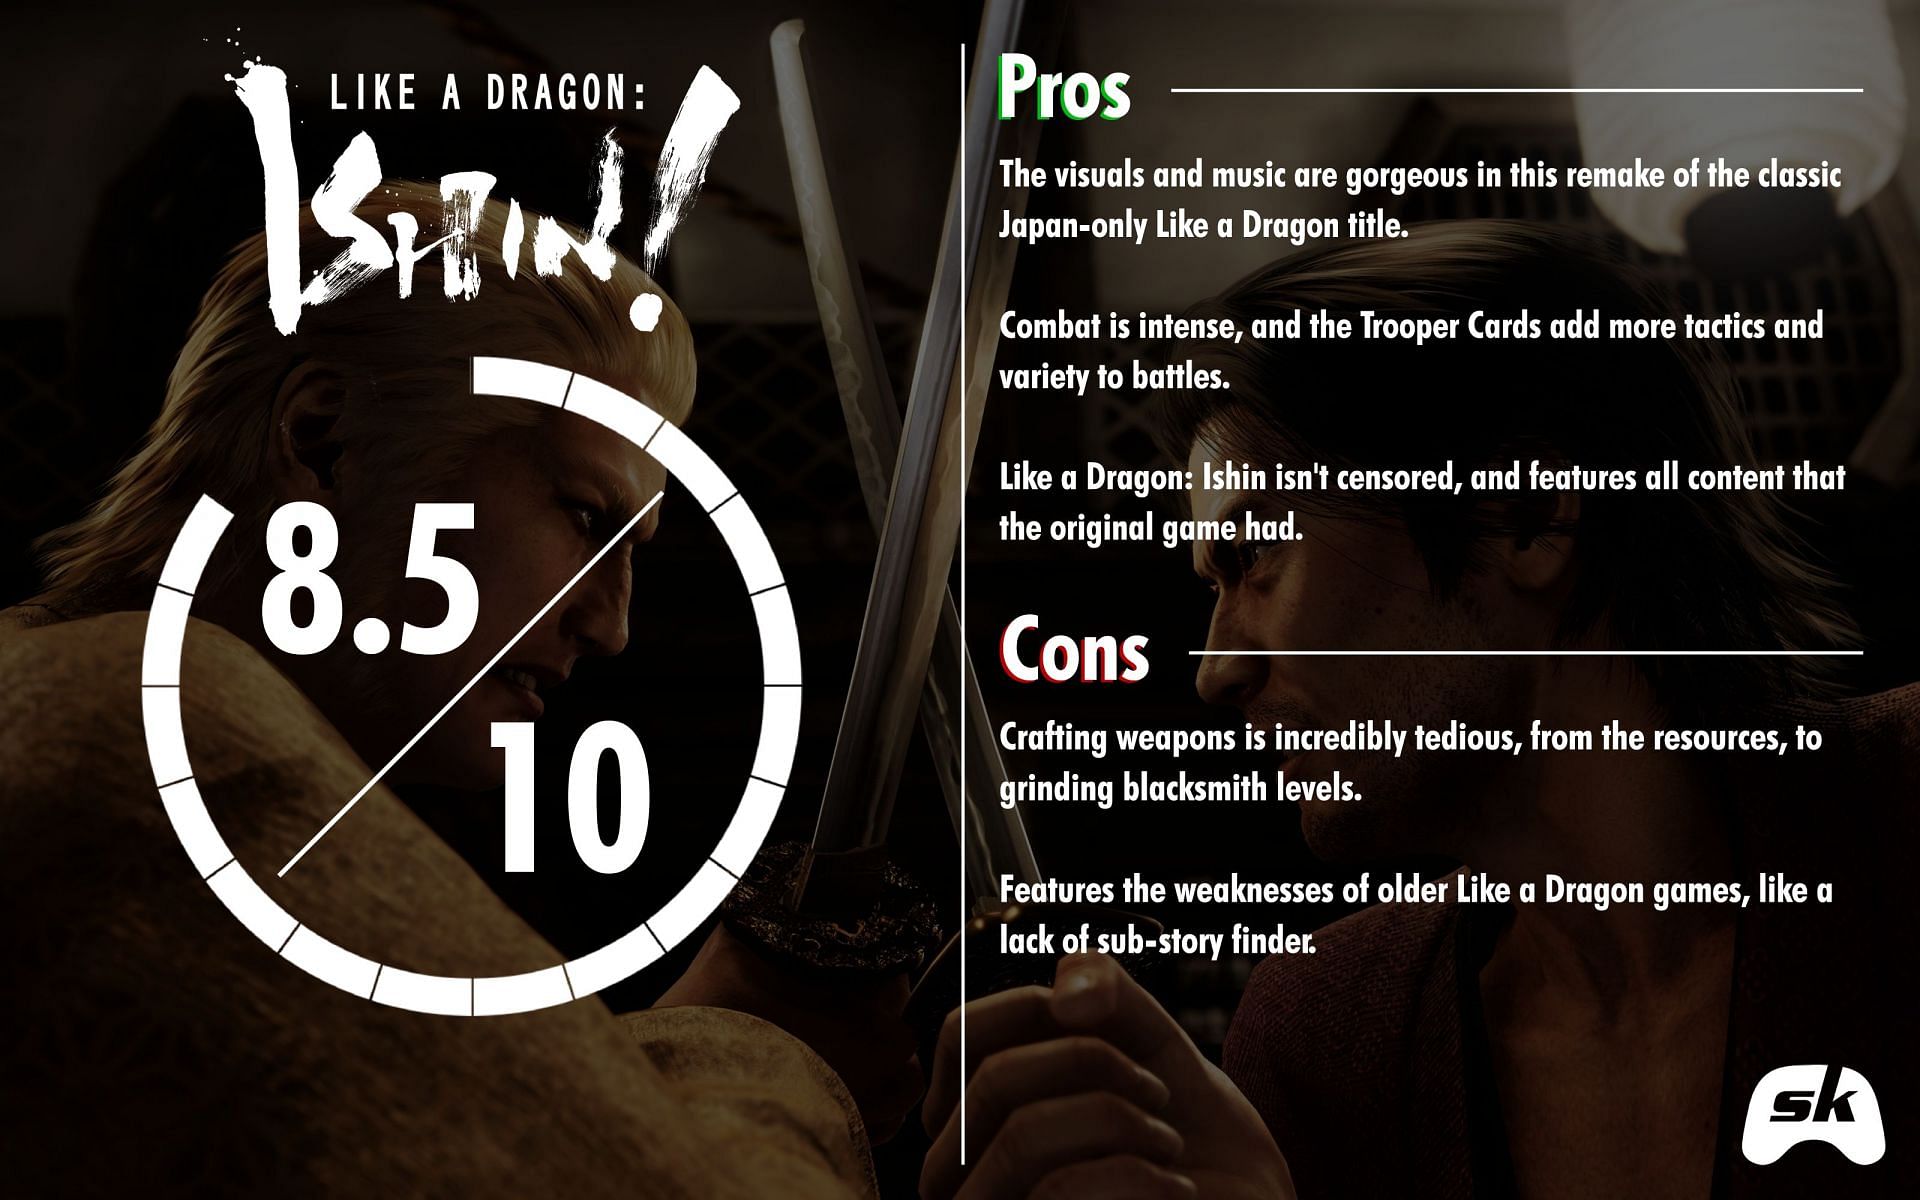 While it features some outdated mechanics, Like a Dragon: Ishin is still a masterpiece (Image via Sportskeeda)